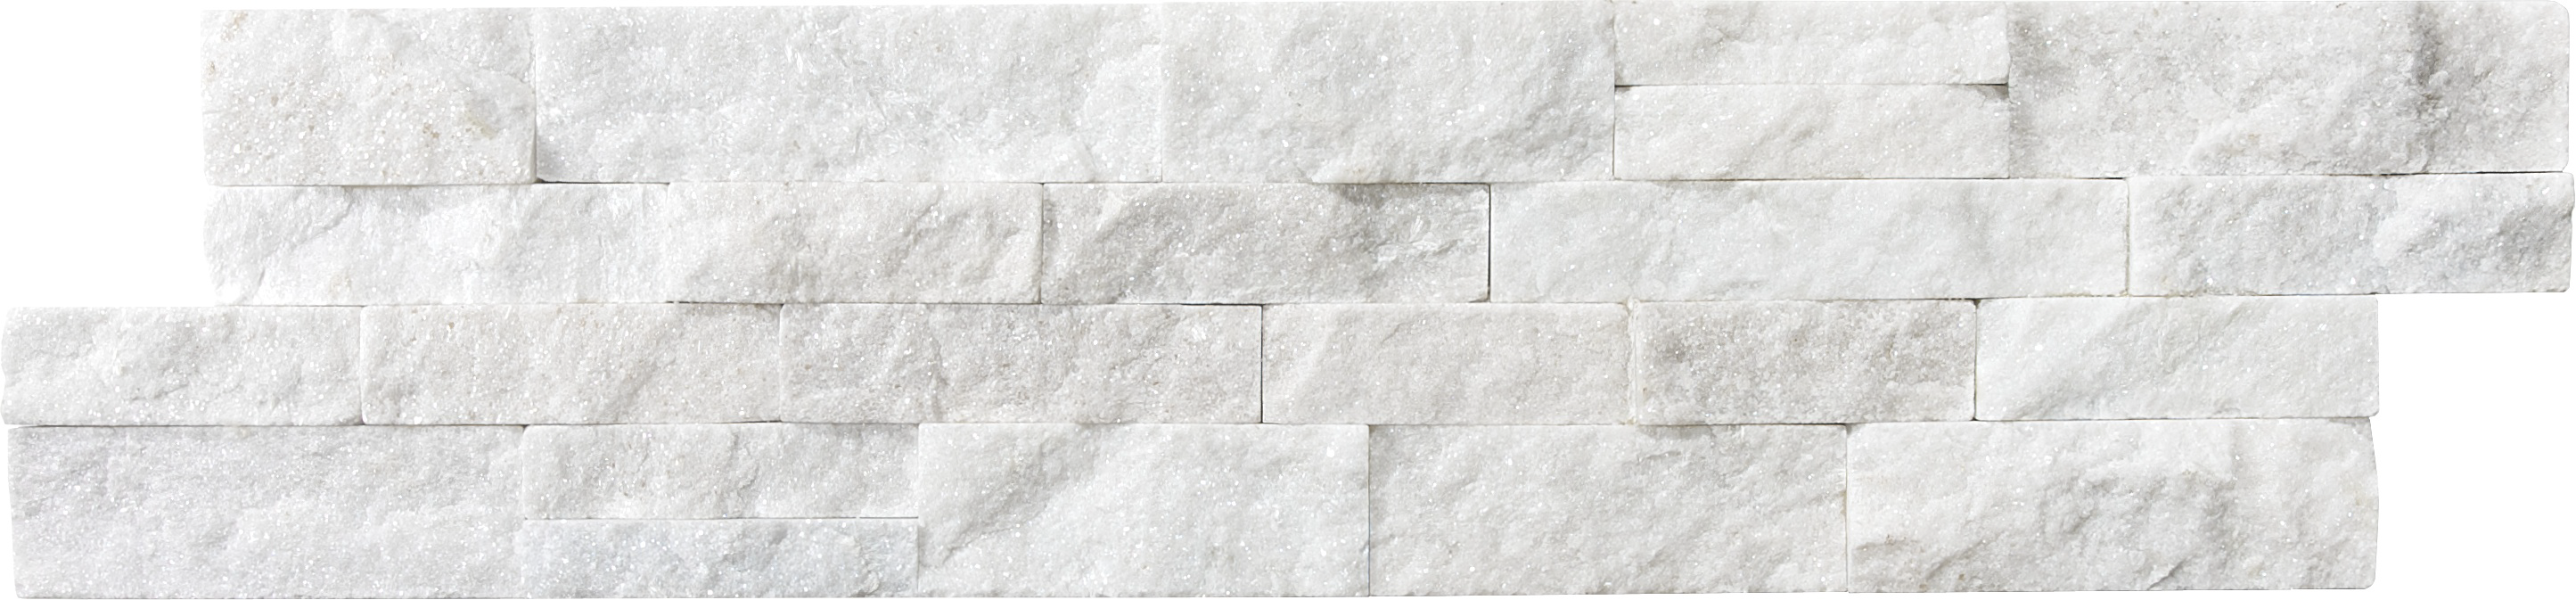 quartzite glacier pattern natural stone field tile from ledger stone anatolia collection distributed by surface group international split face finish straight edge edge 6x24 rectangle shape